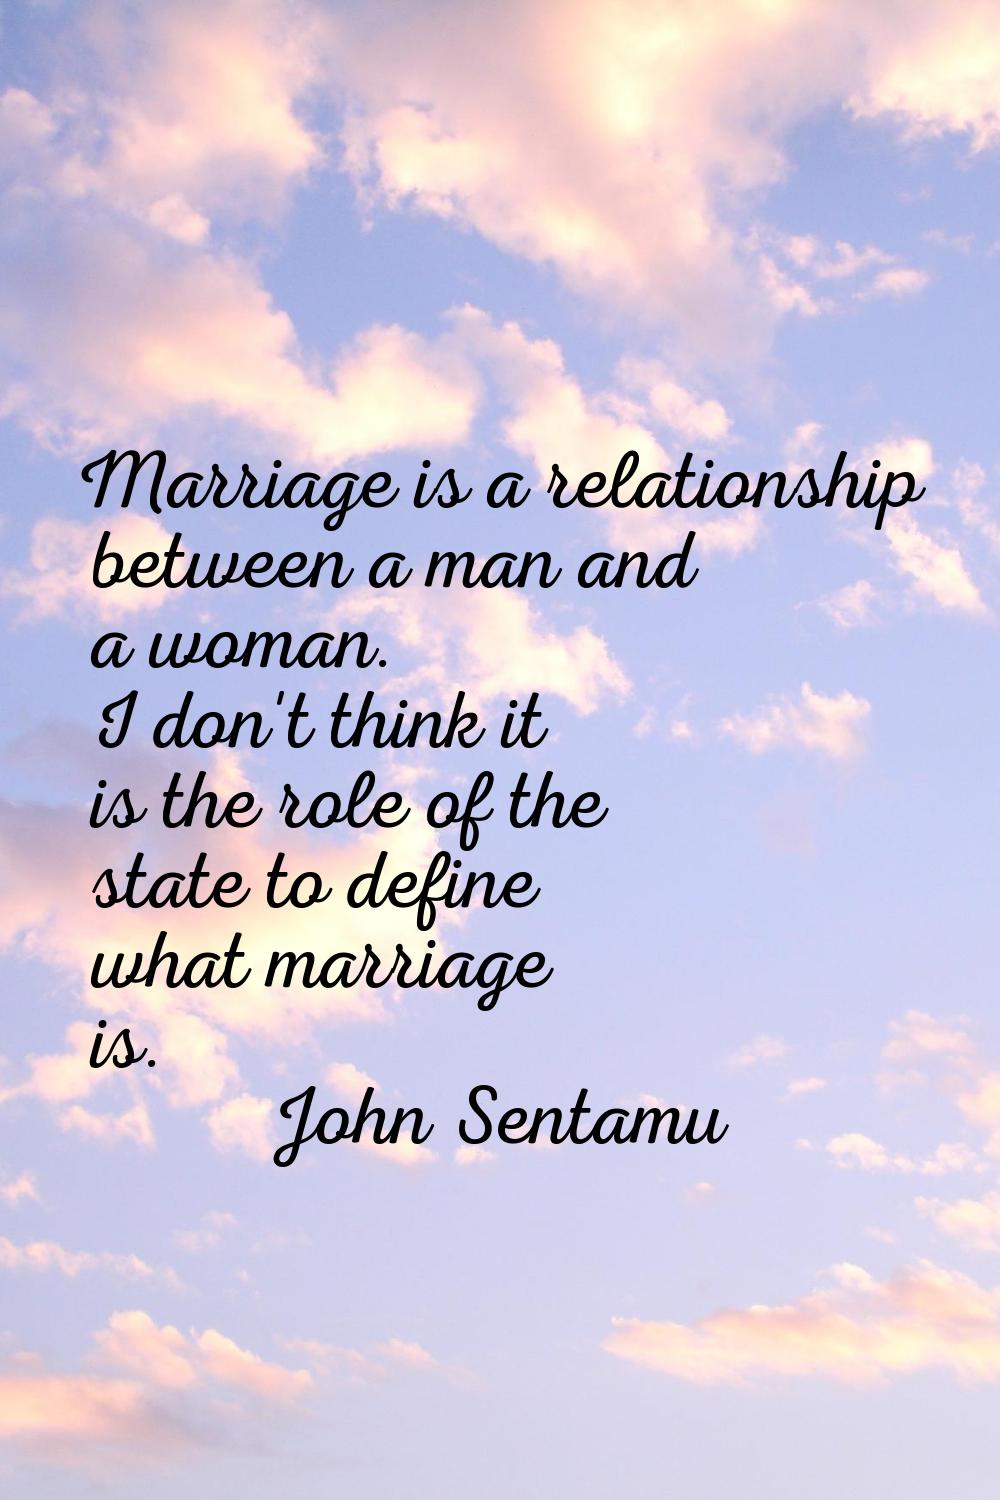 Marriage is a relationship between a man and a woman. I don't think it is the role of the state to 